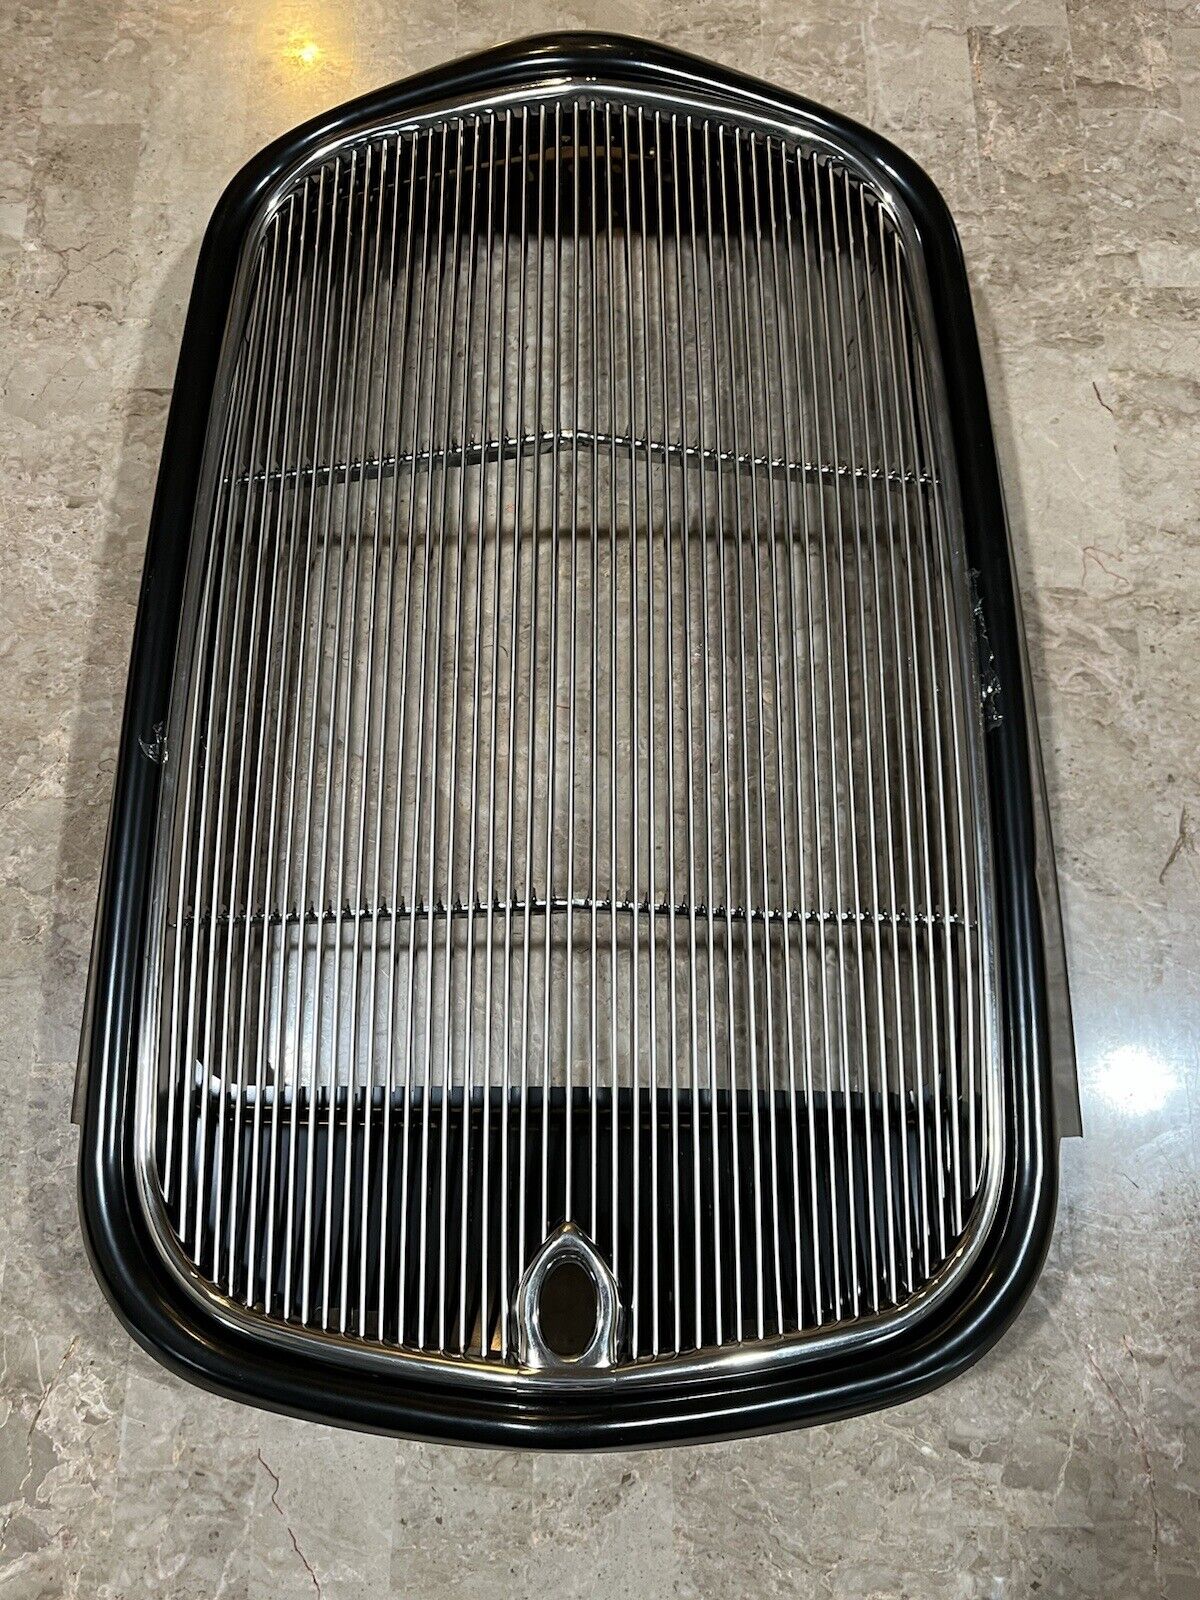 1932 Ford Hot Rod Steel Radiator Grill Shell + Smooth Stainless Grille Insert